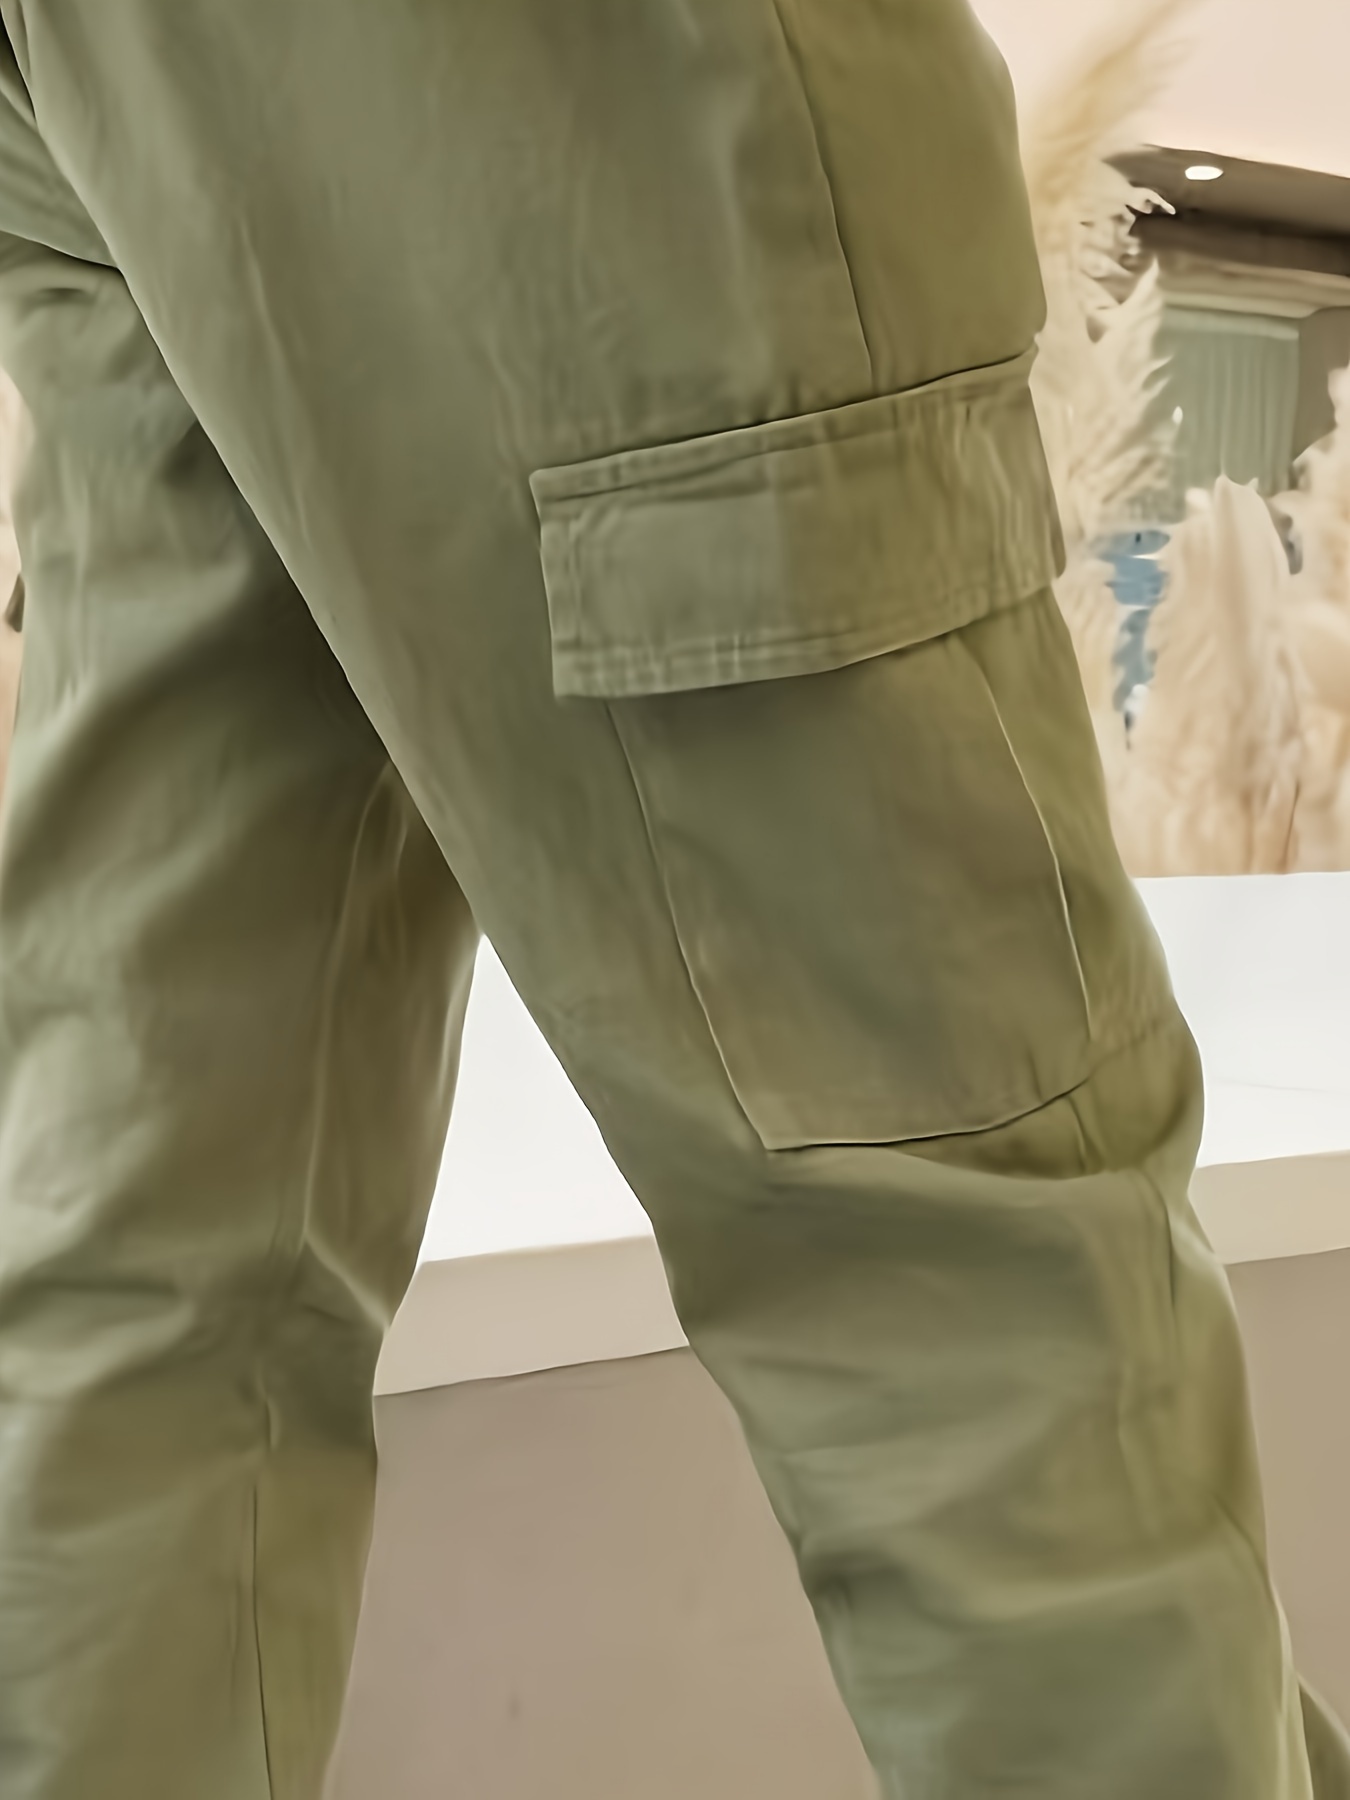 H&M Belted Cargo Pants  Fashion pants, Cargo pants outfit, Outfits